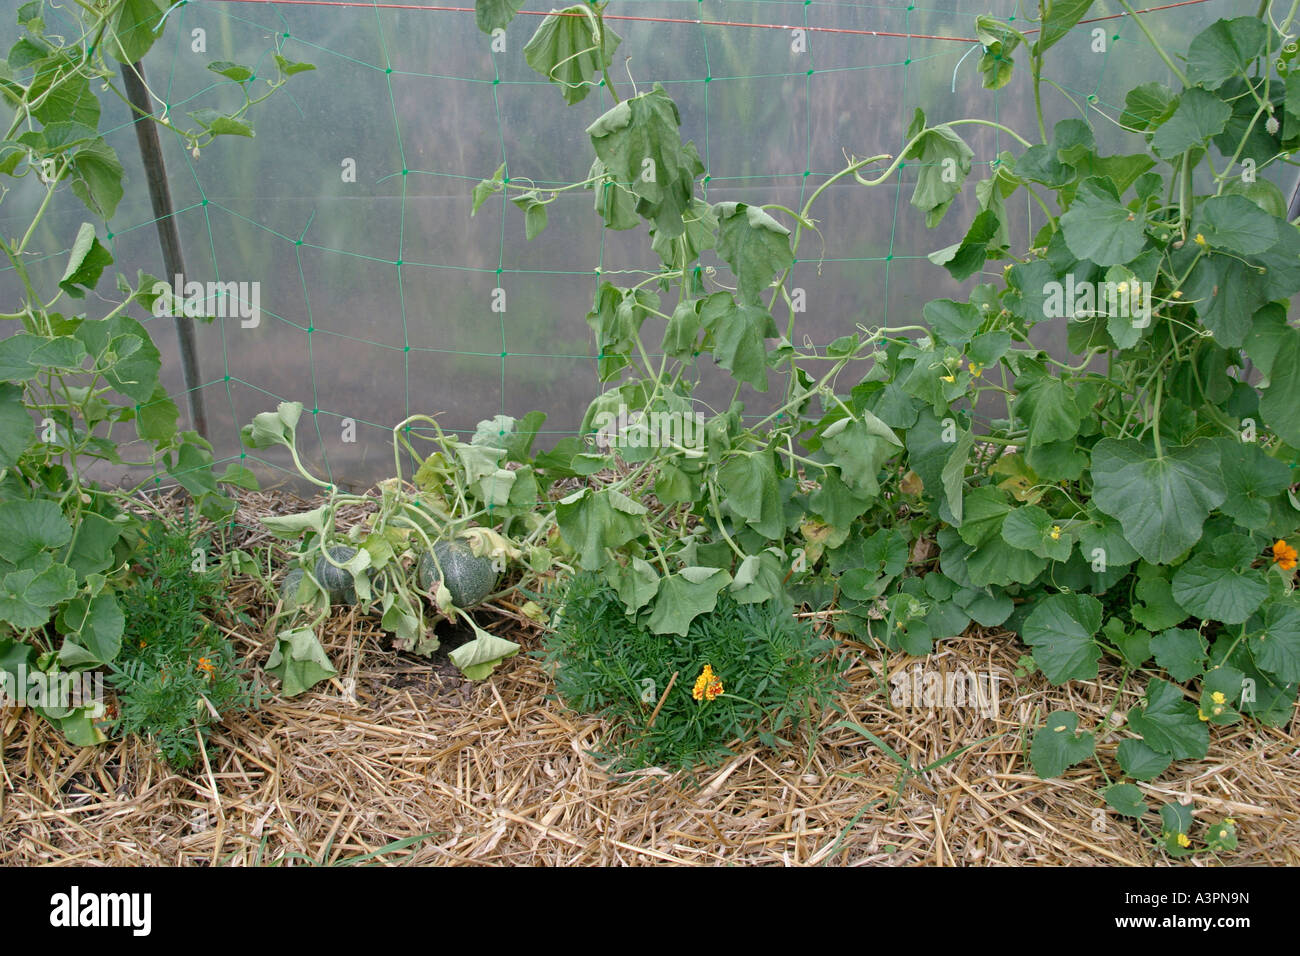 root and foot rot causes melon to wilt Stock Photo